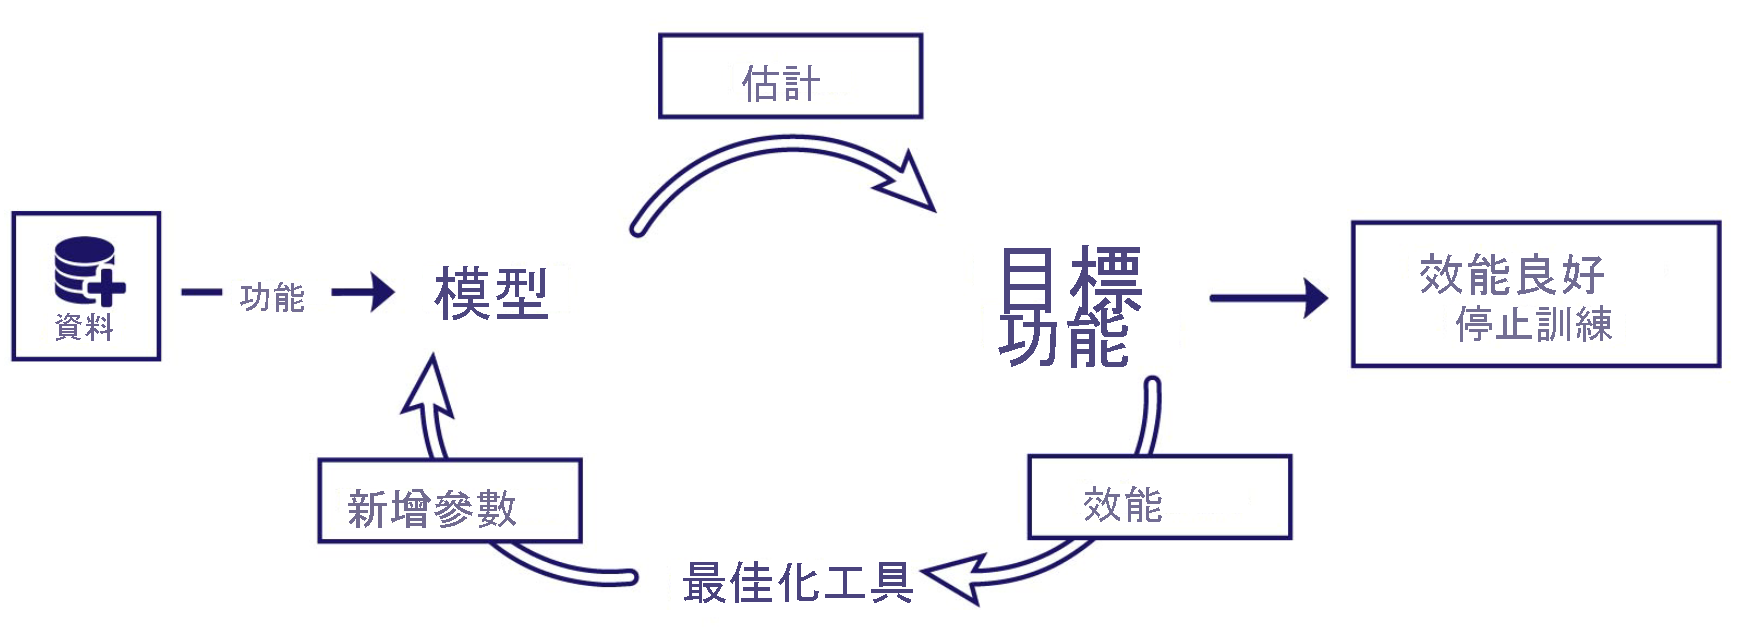 Diagram of the final training, showing the machine learning model lifecycle.